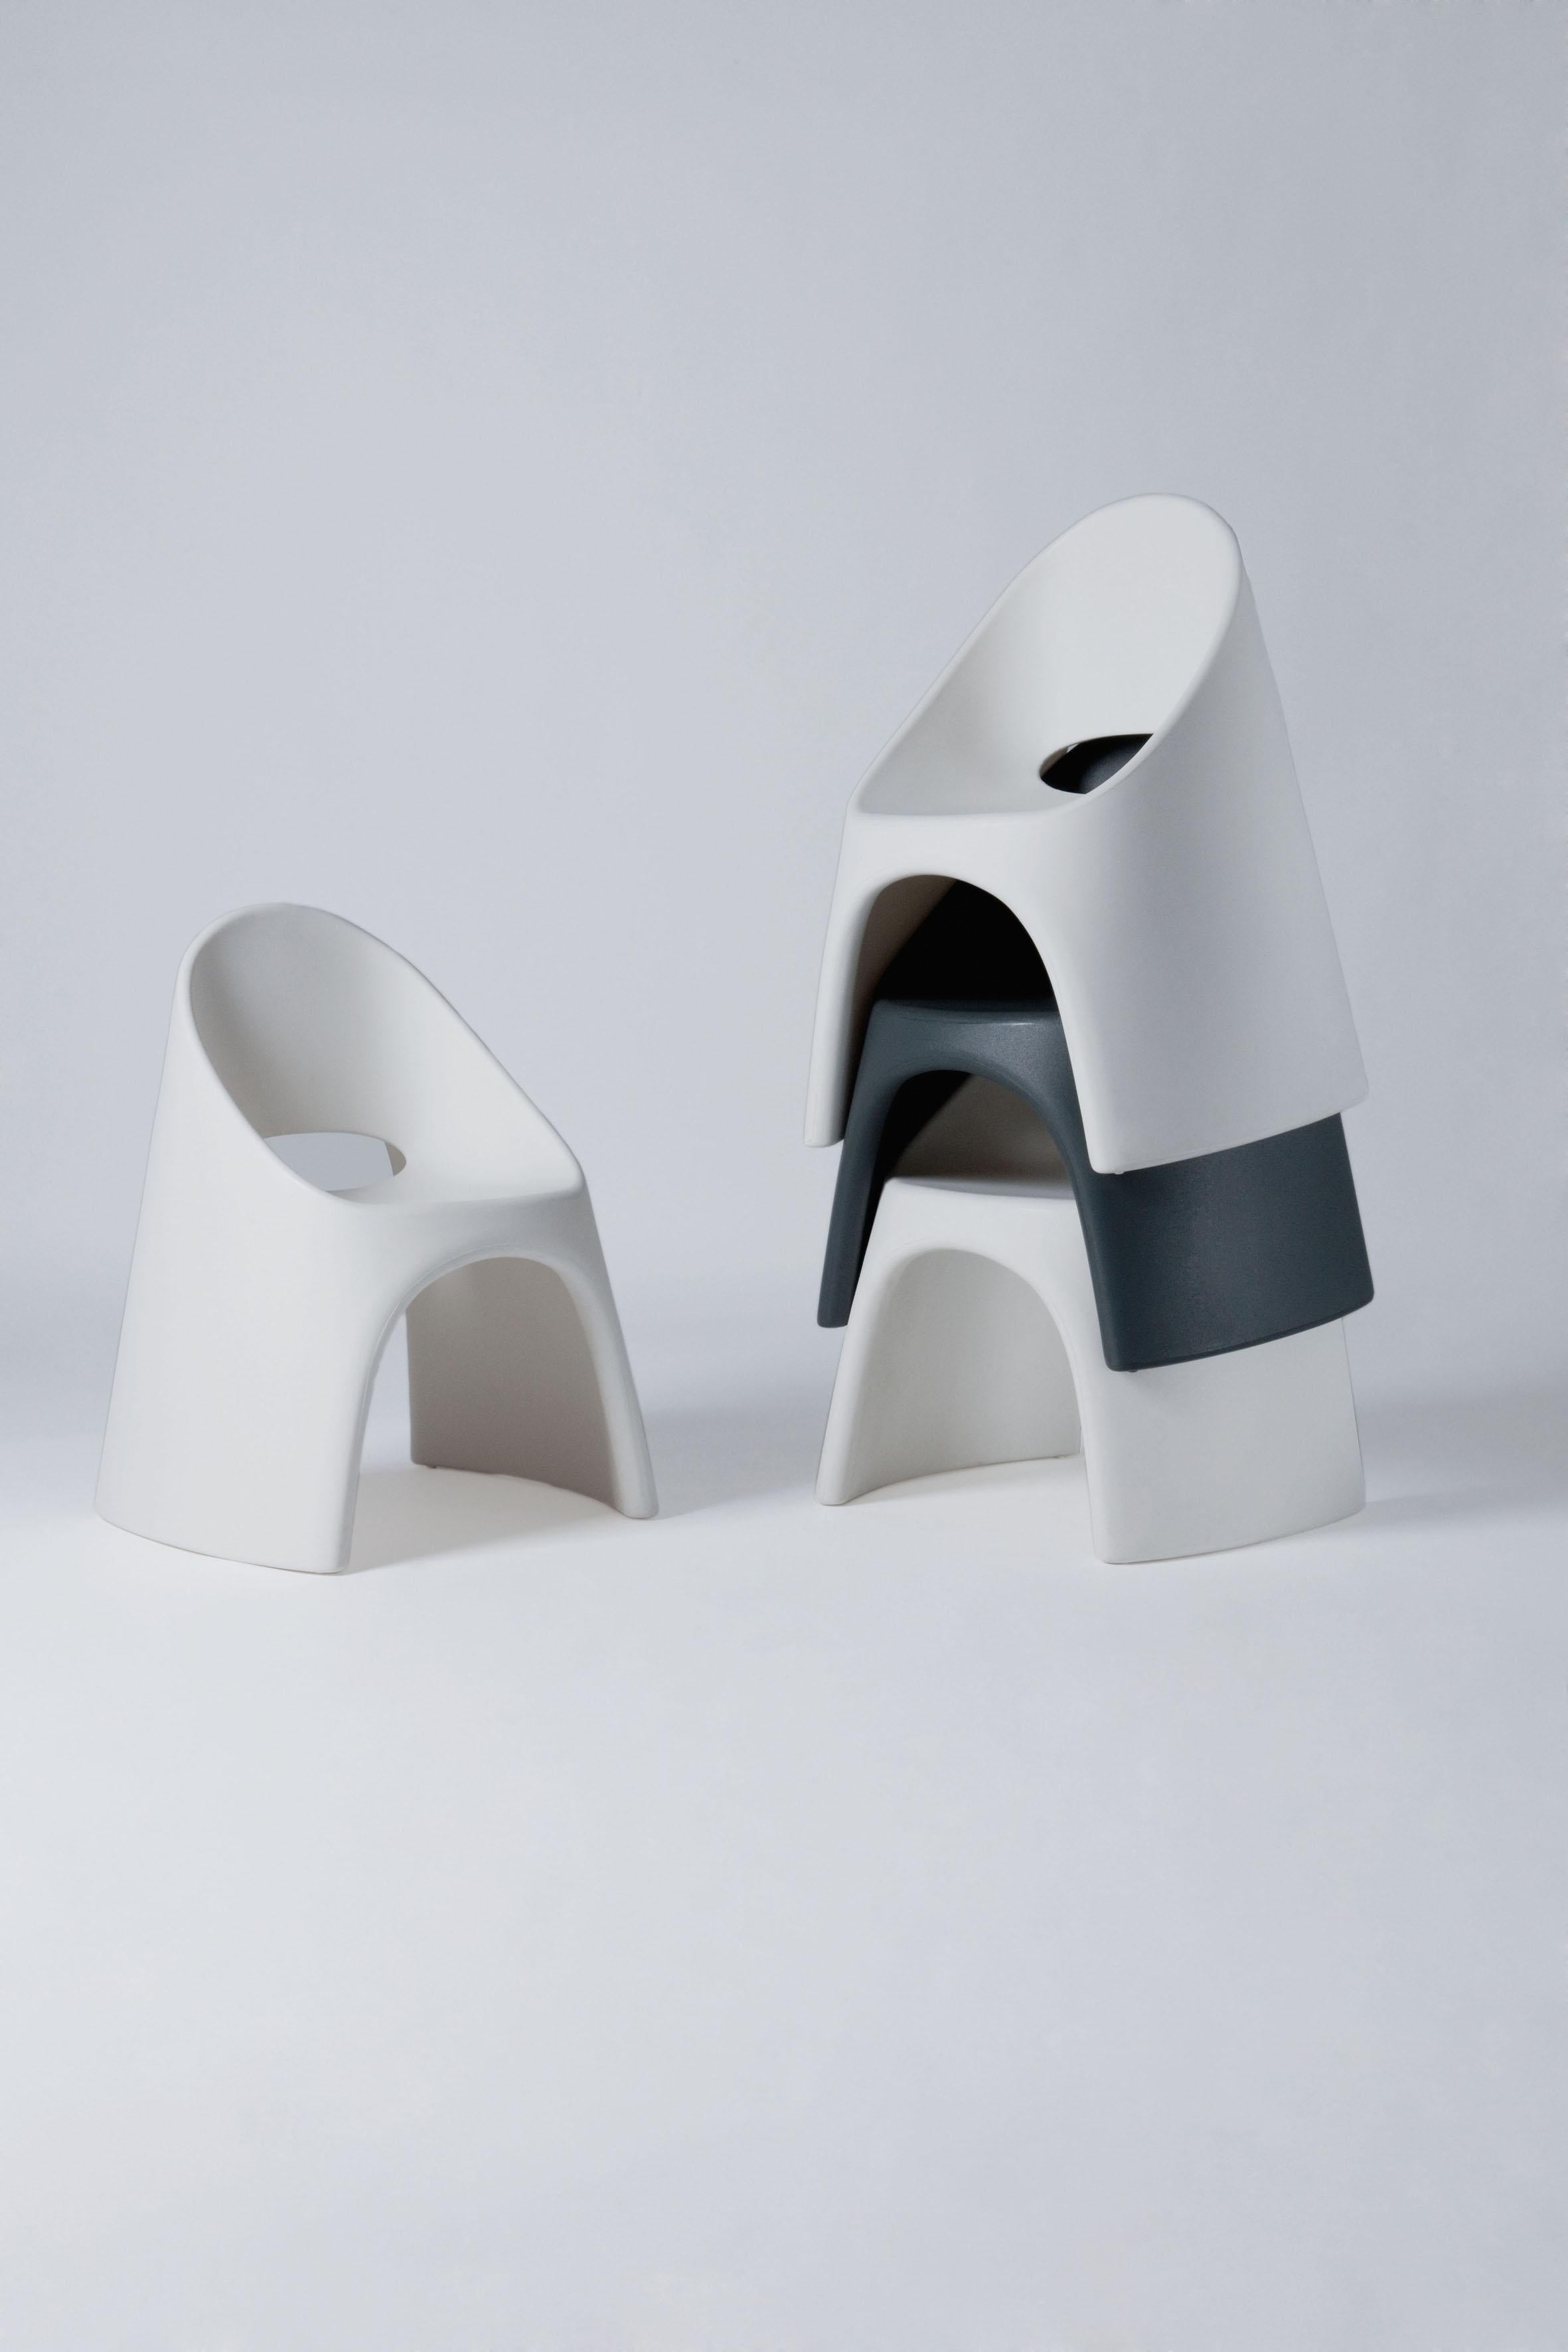 Contemporary Slide Design Amélie Chair in Milky White by Italo Pertichini For Sale